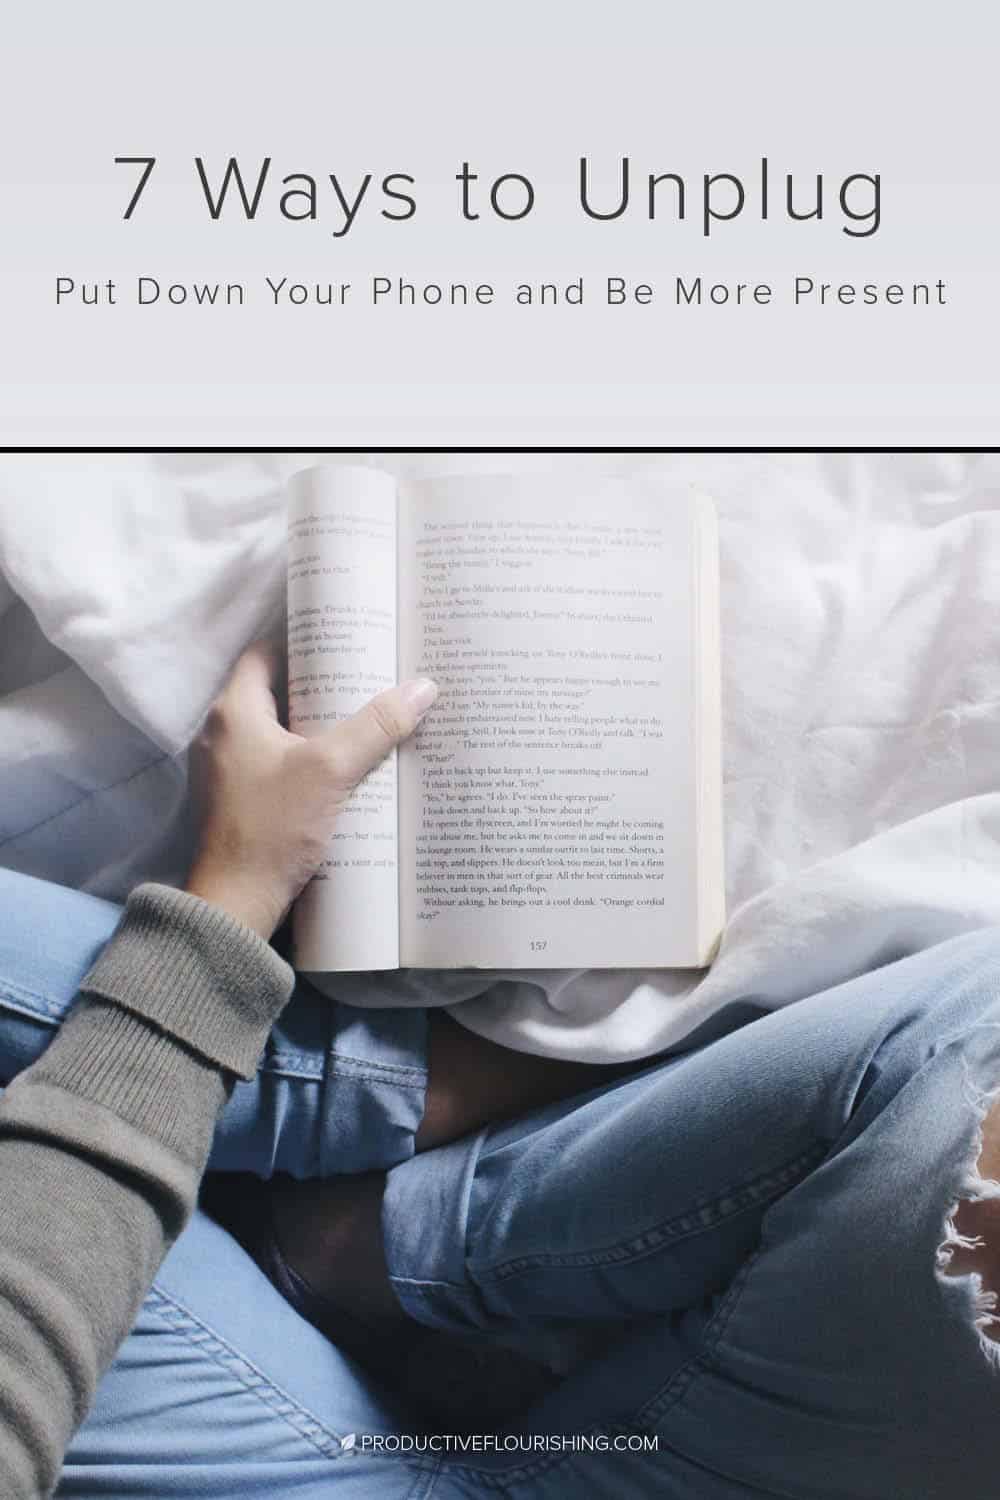 How to put down your phone and become more present in your life. 7 ideas for ways to unplug as an entrepreneur. #unplug #selfcare #productiveflourishing